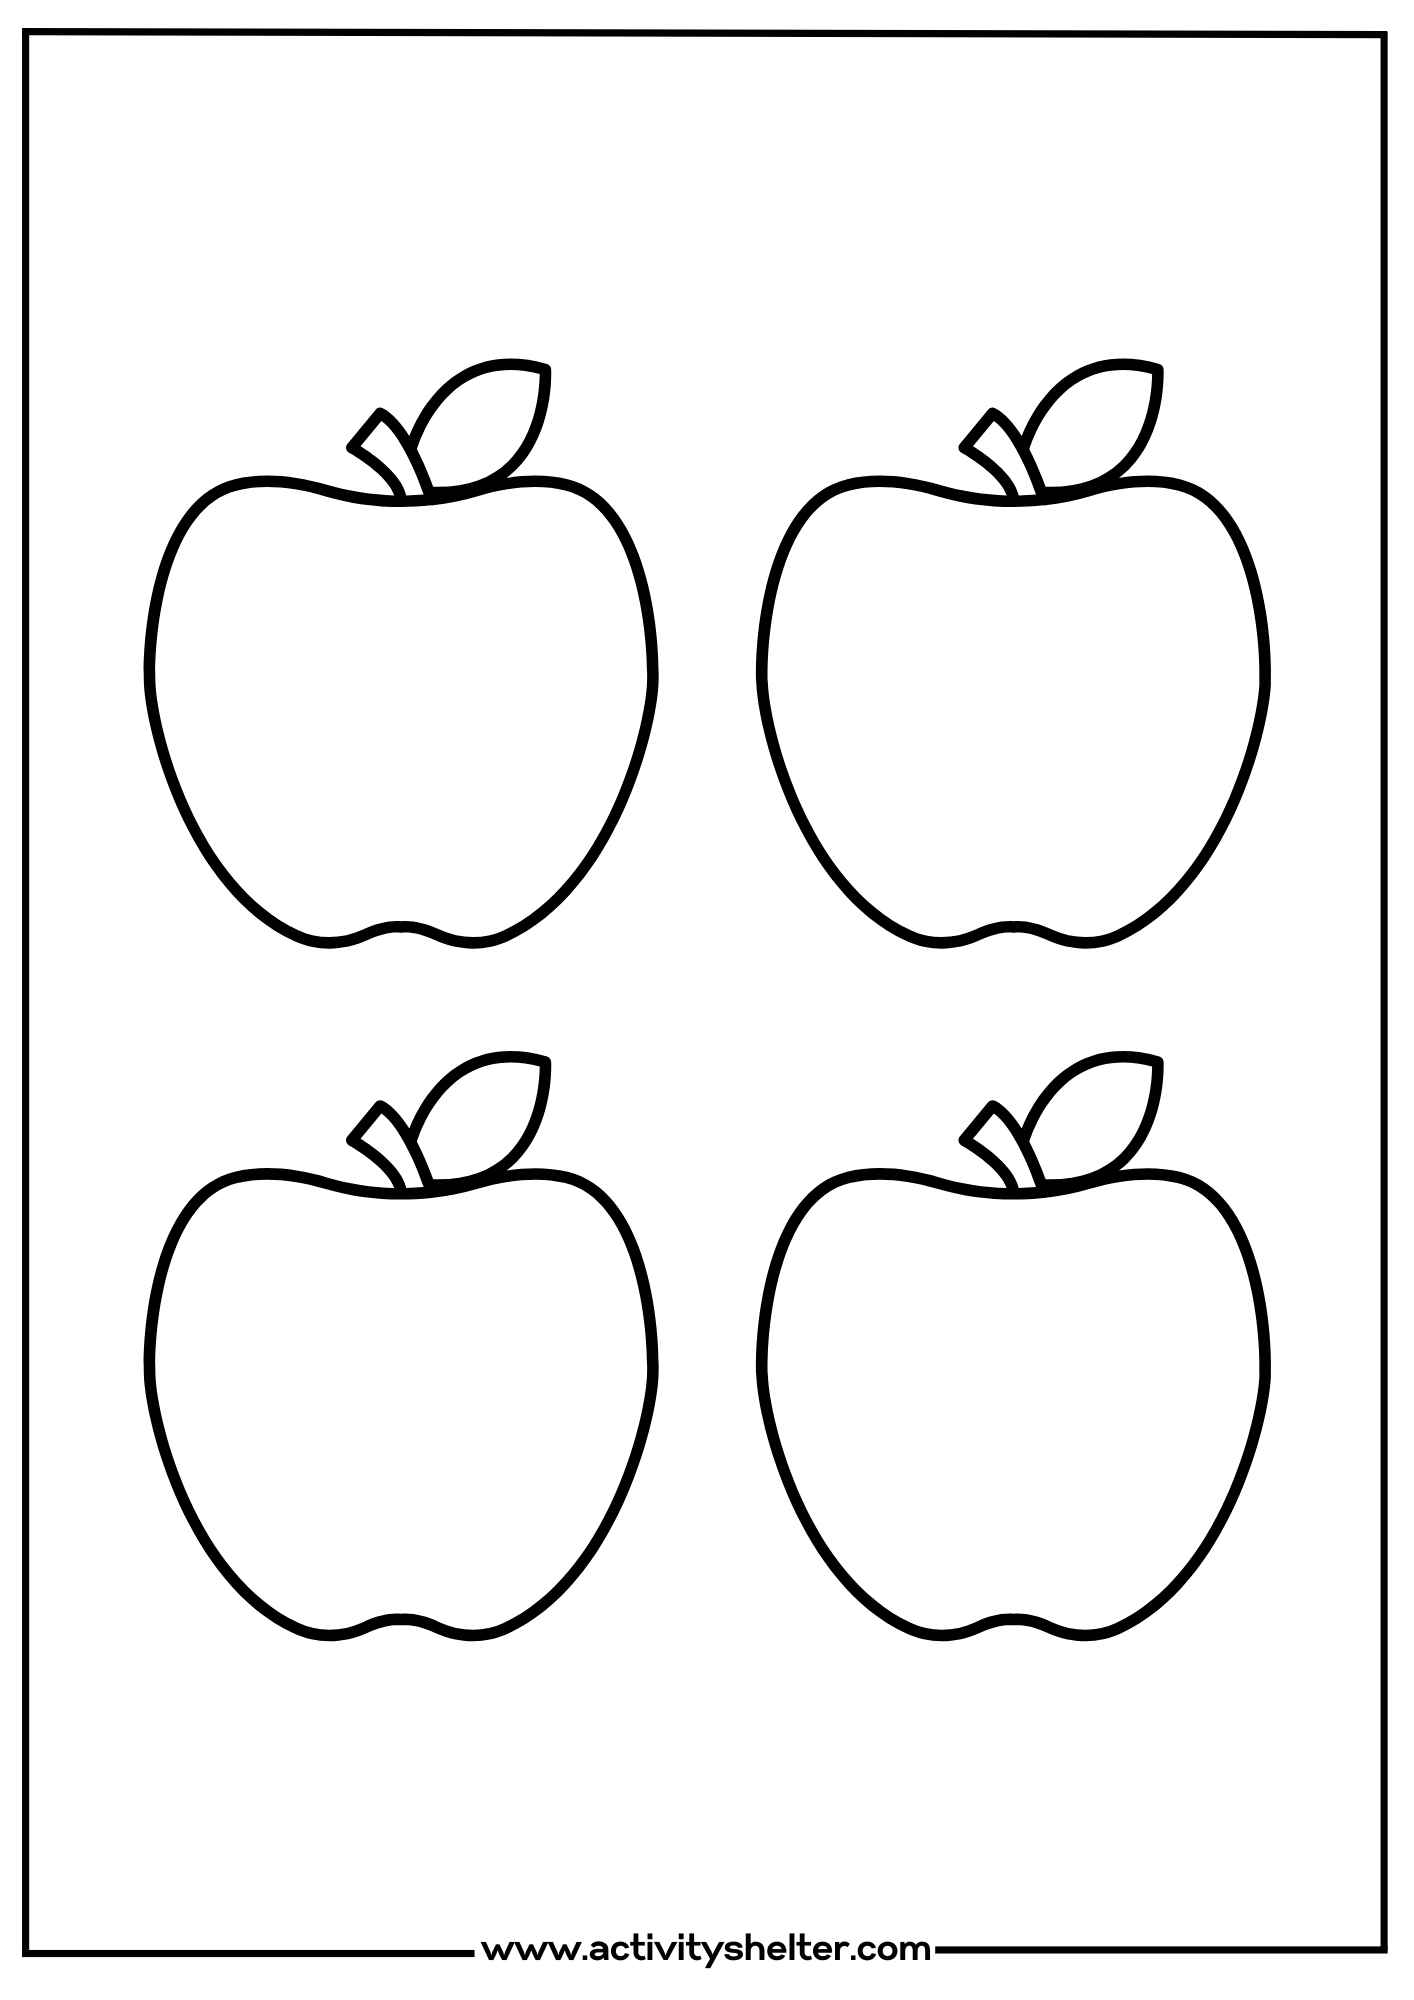 Apple Template to Print Small Size